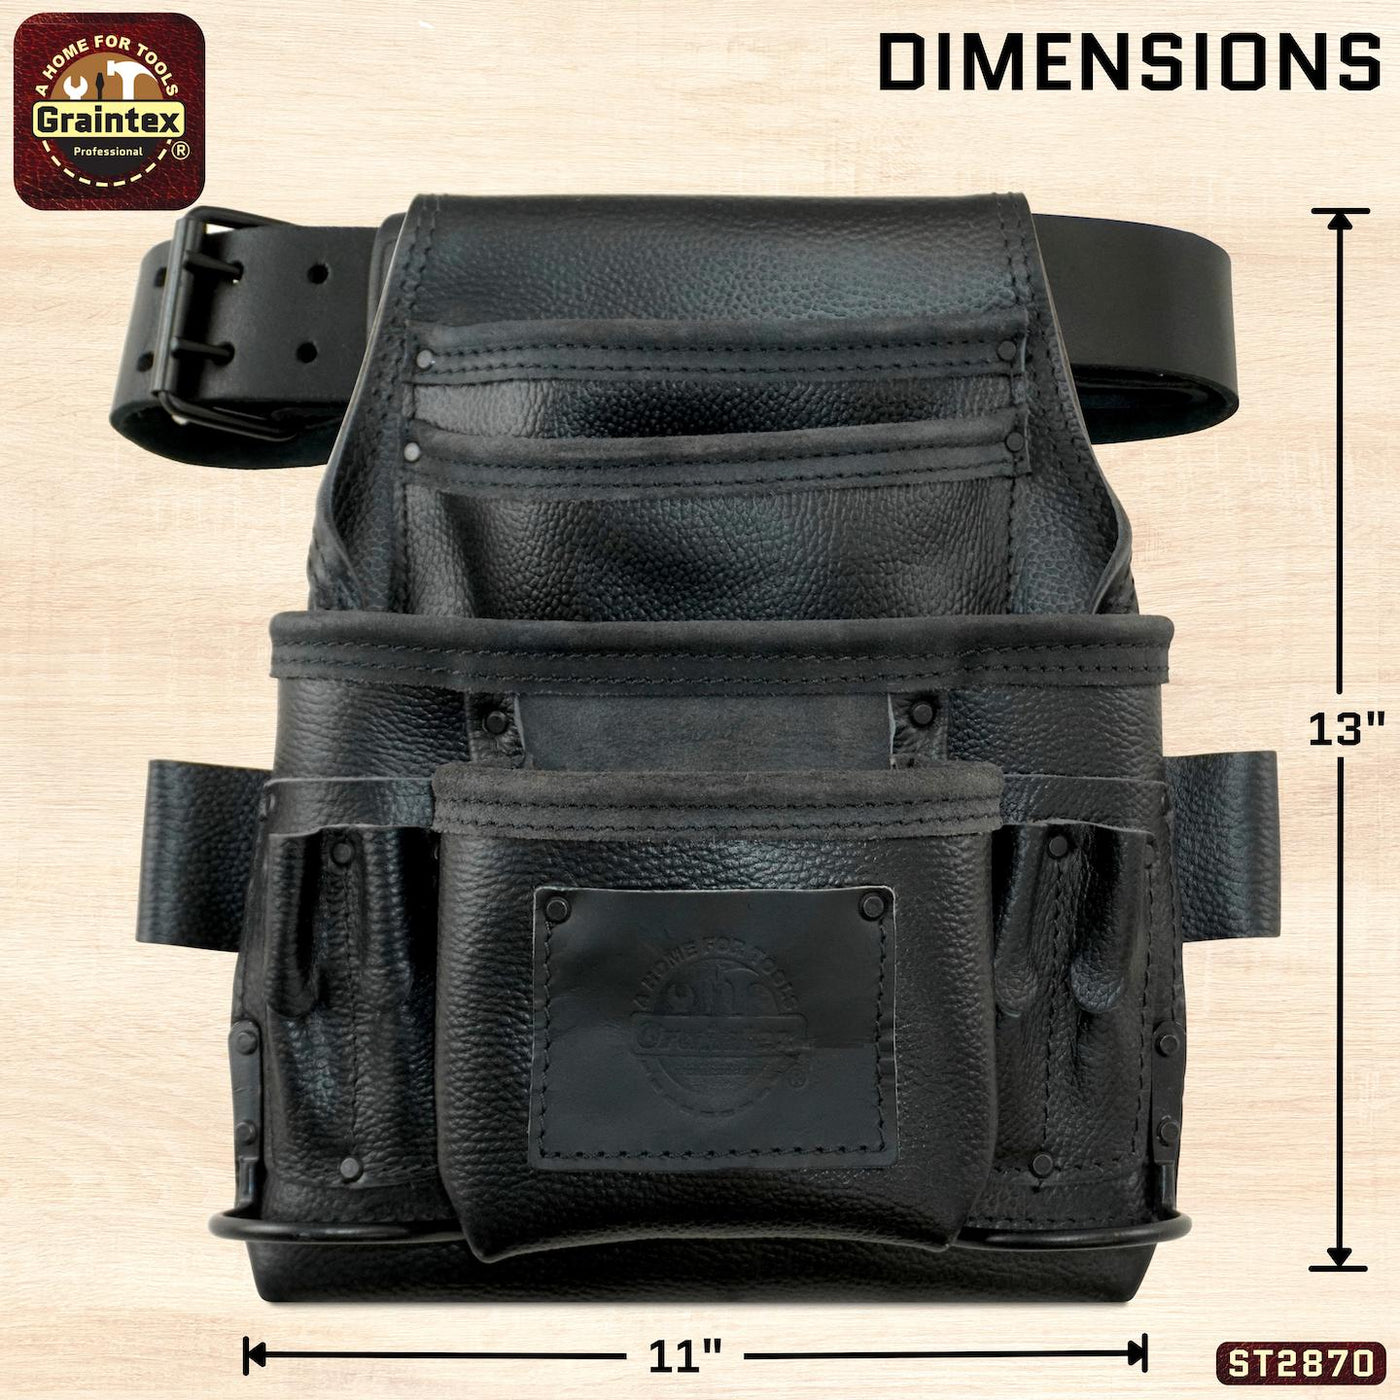 ST2870 :: 10 Pocket Nail & Tool Pouch Black Color RUGGED Top Grain Leather W/2" Leather Belt